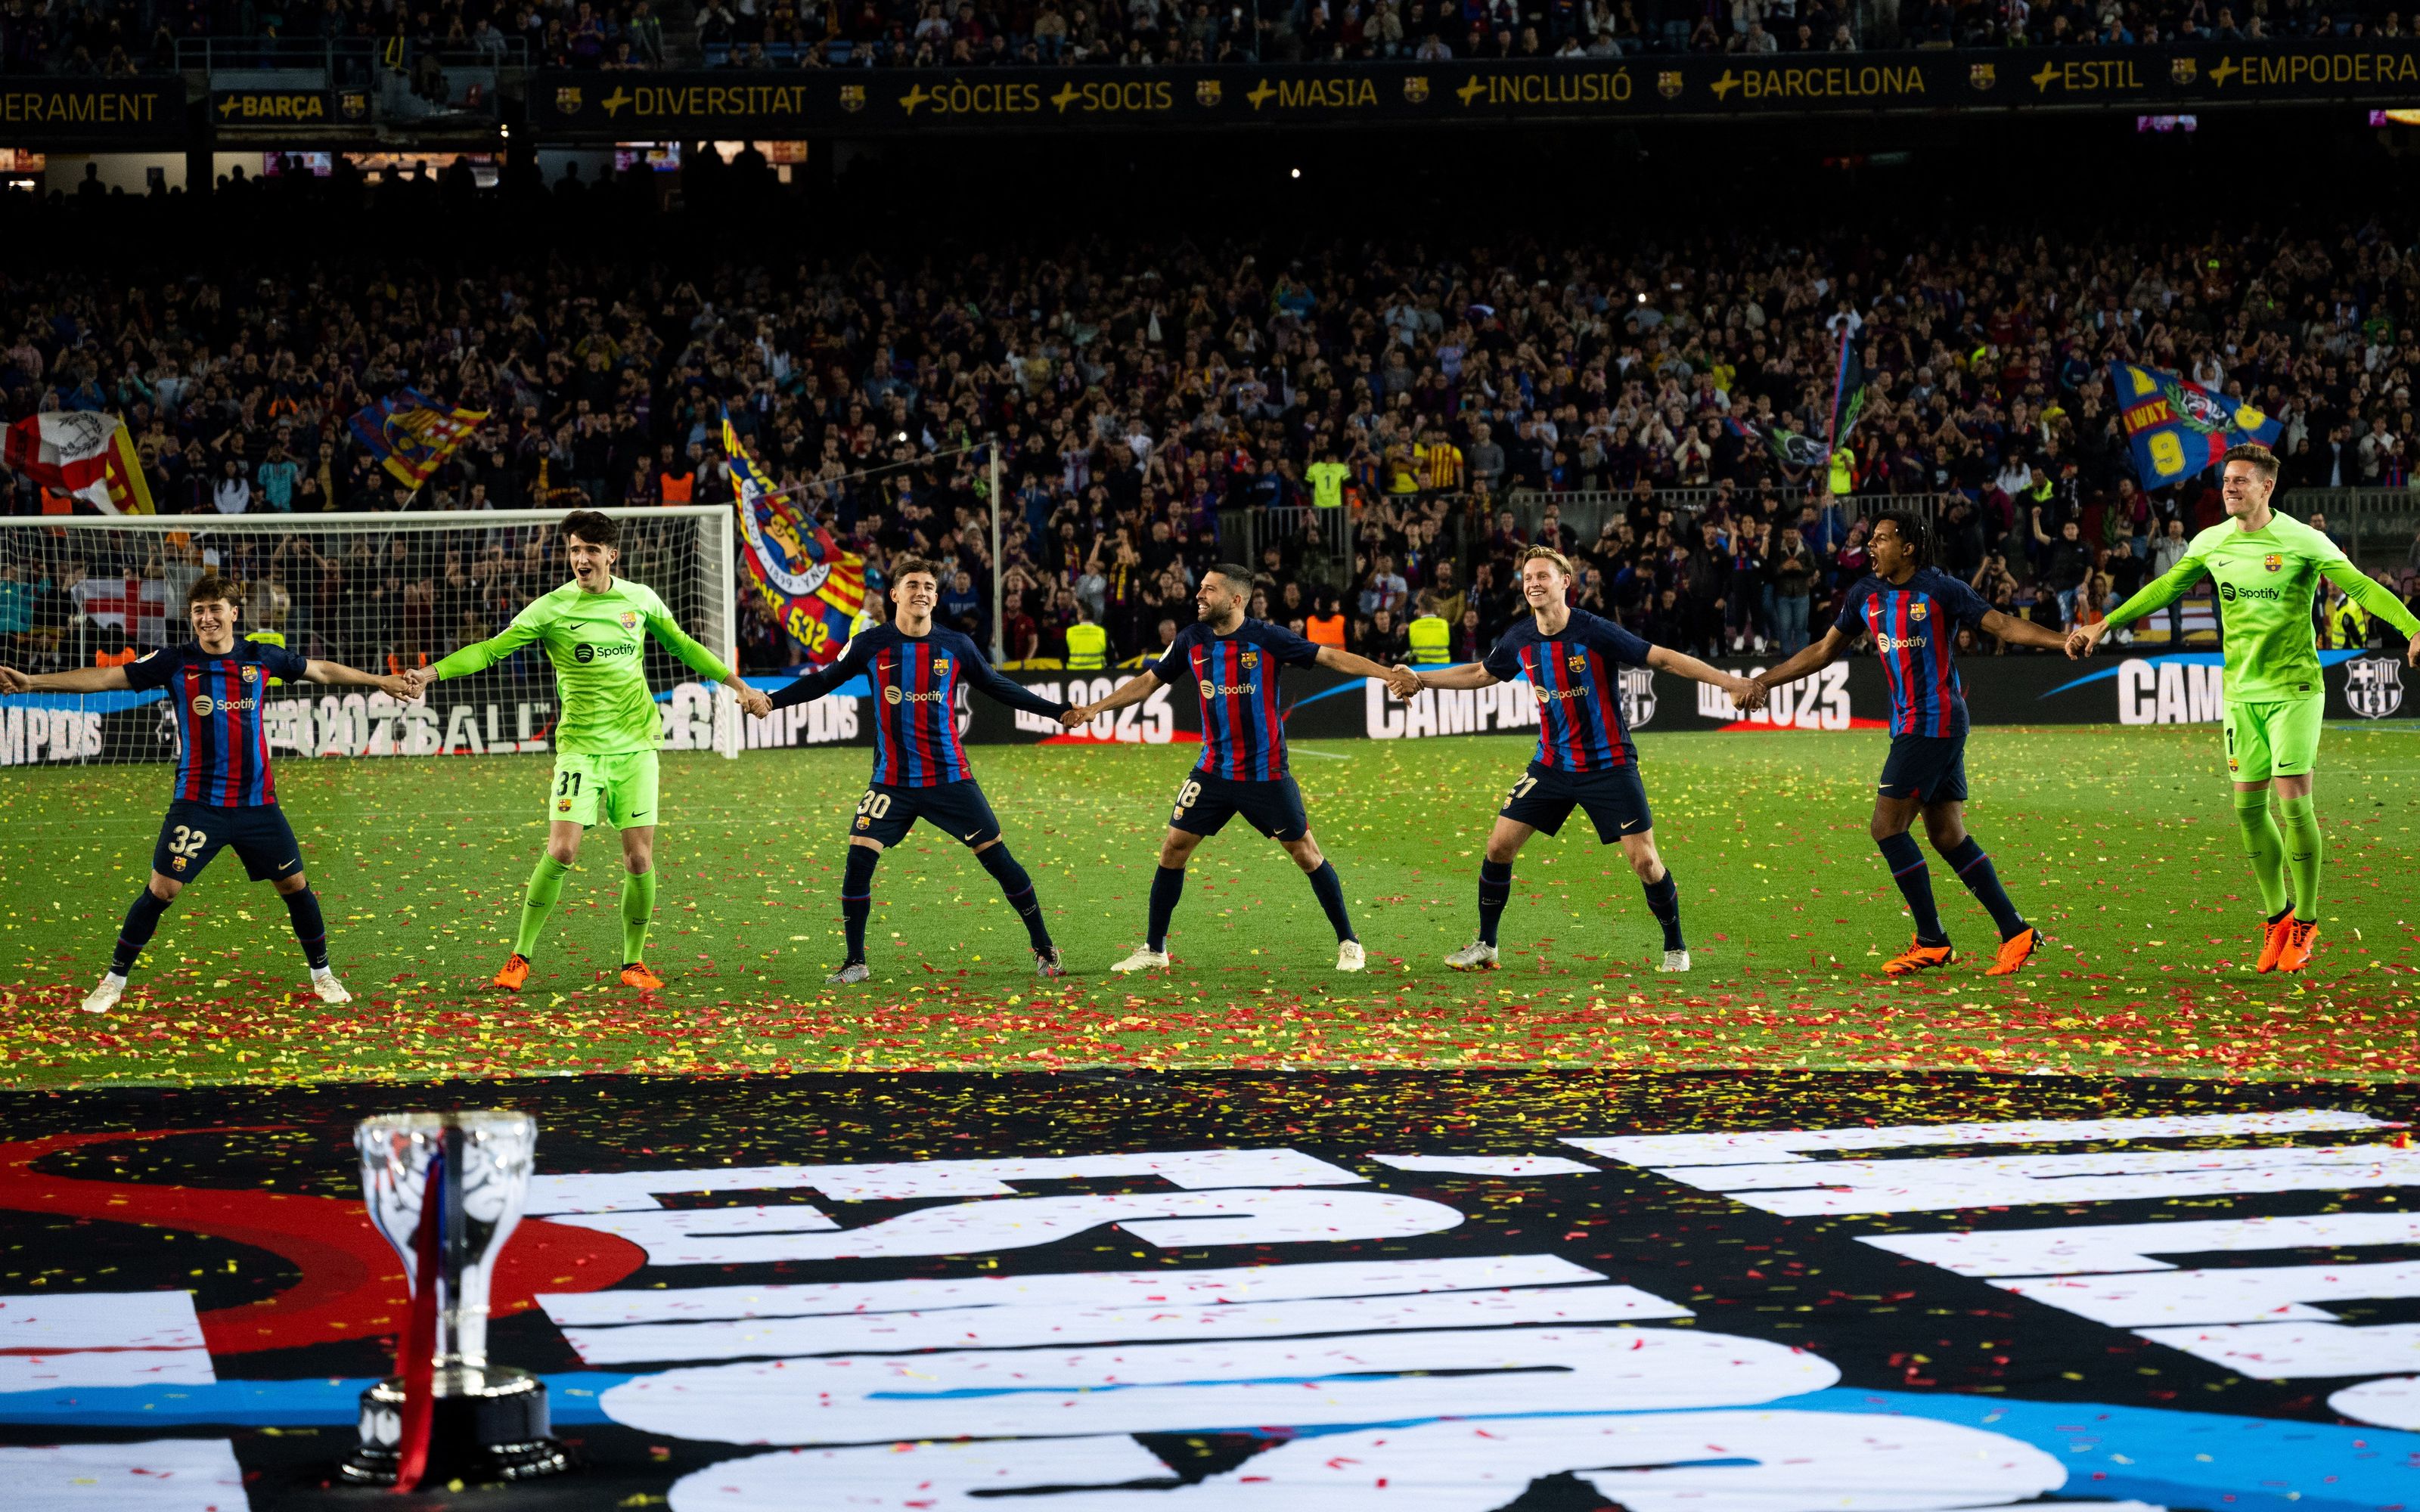 The best photos from the league title celebrations at Camp Nou